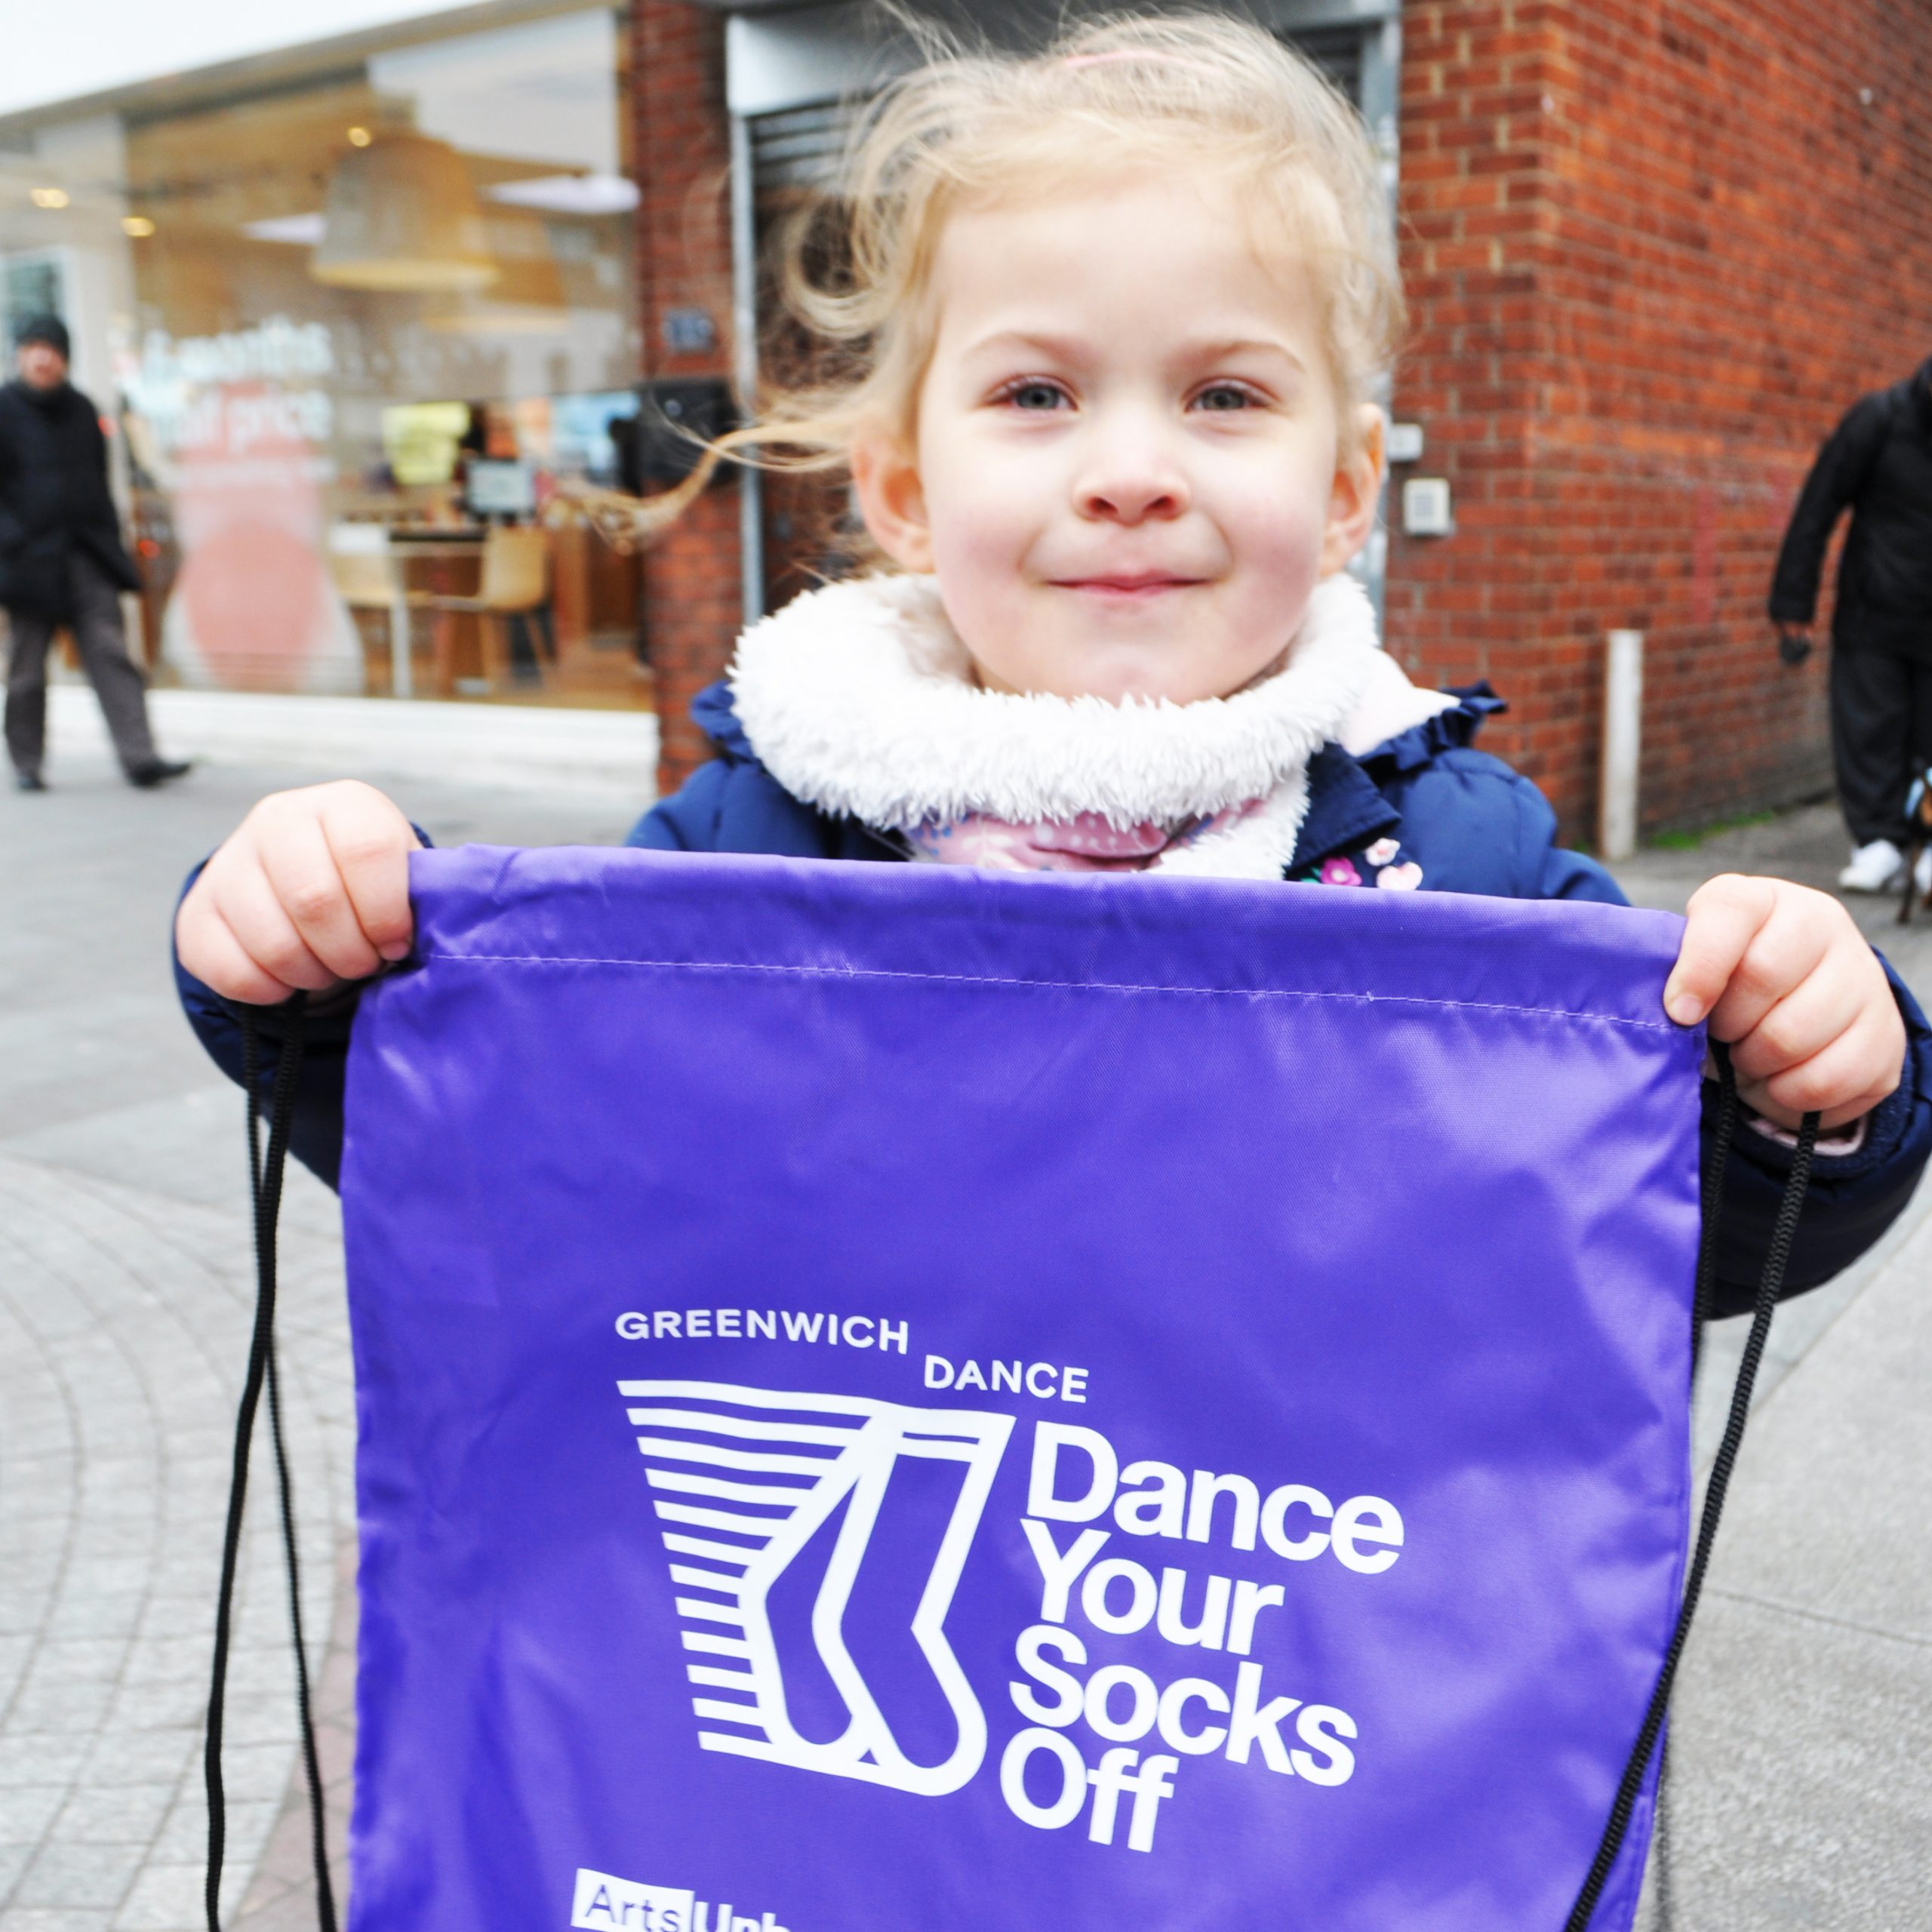 Dance Your Socks Off. A young girl holds up a purple bag with the Dance Your Socks Off logo printed on it